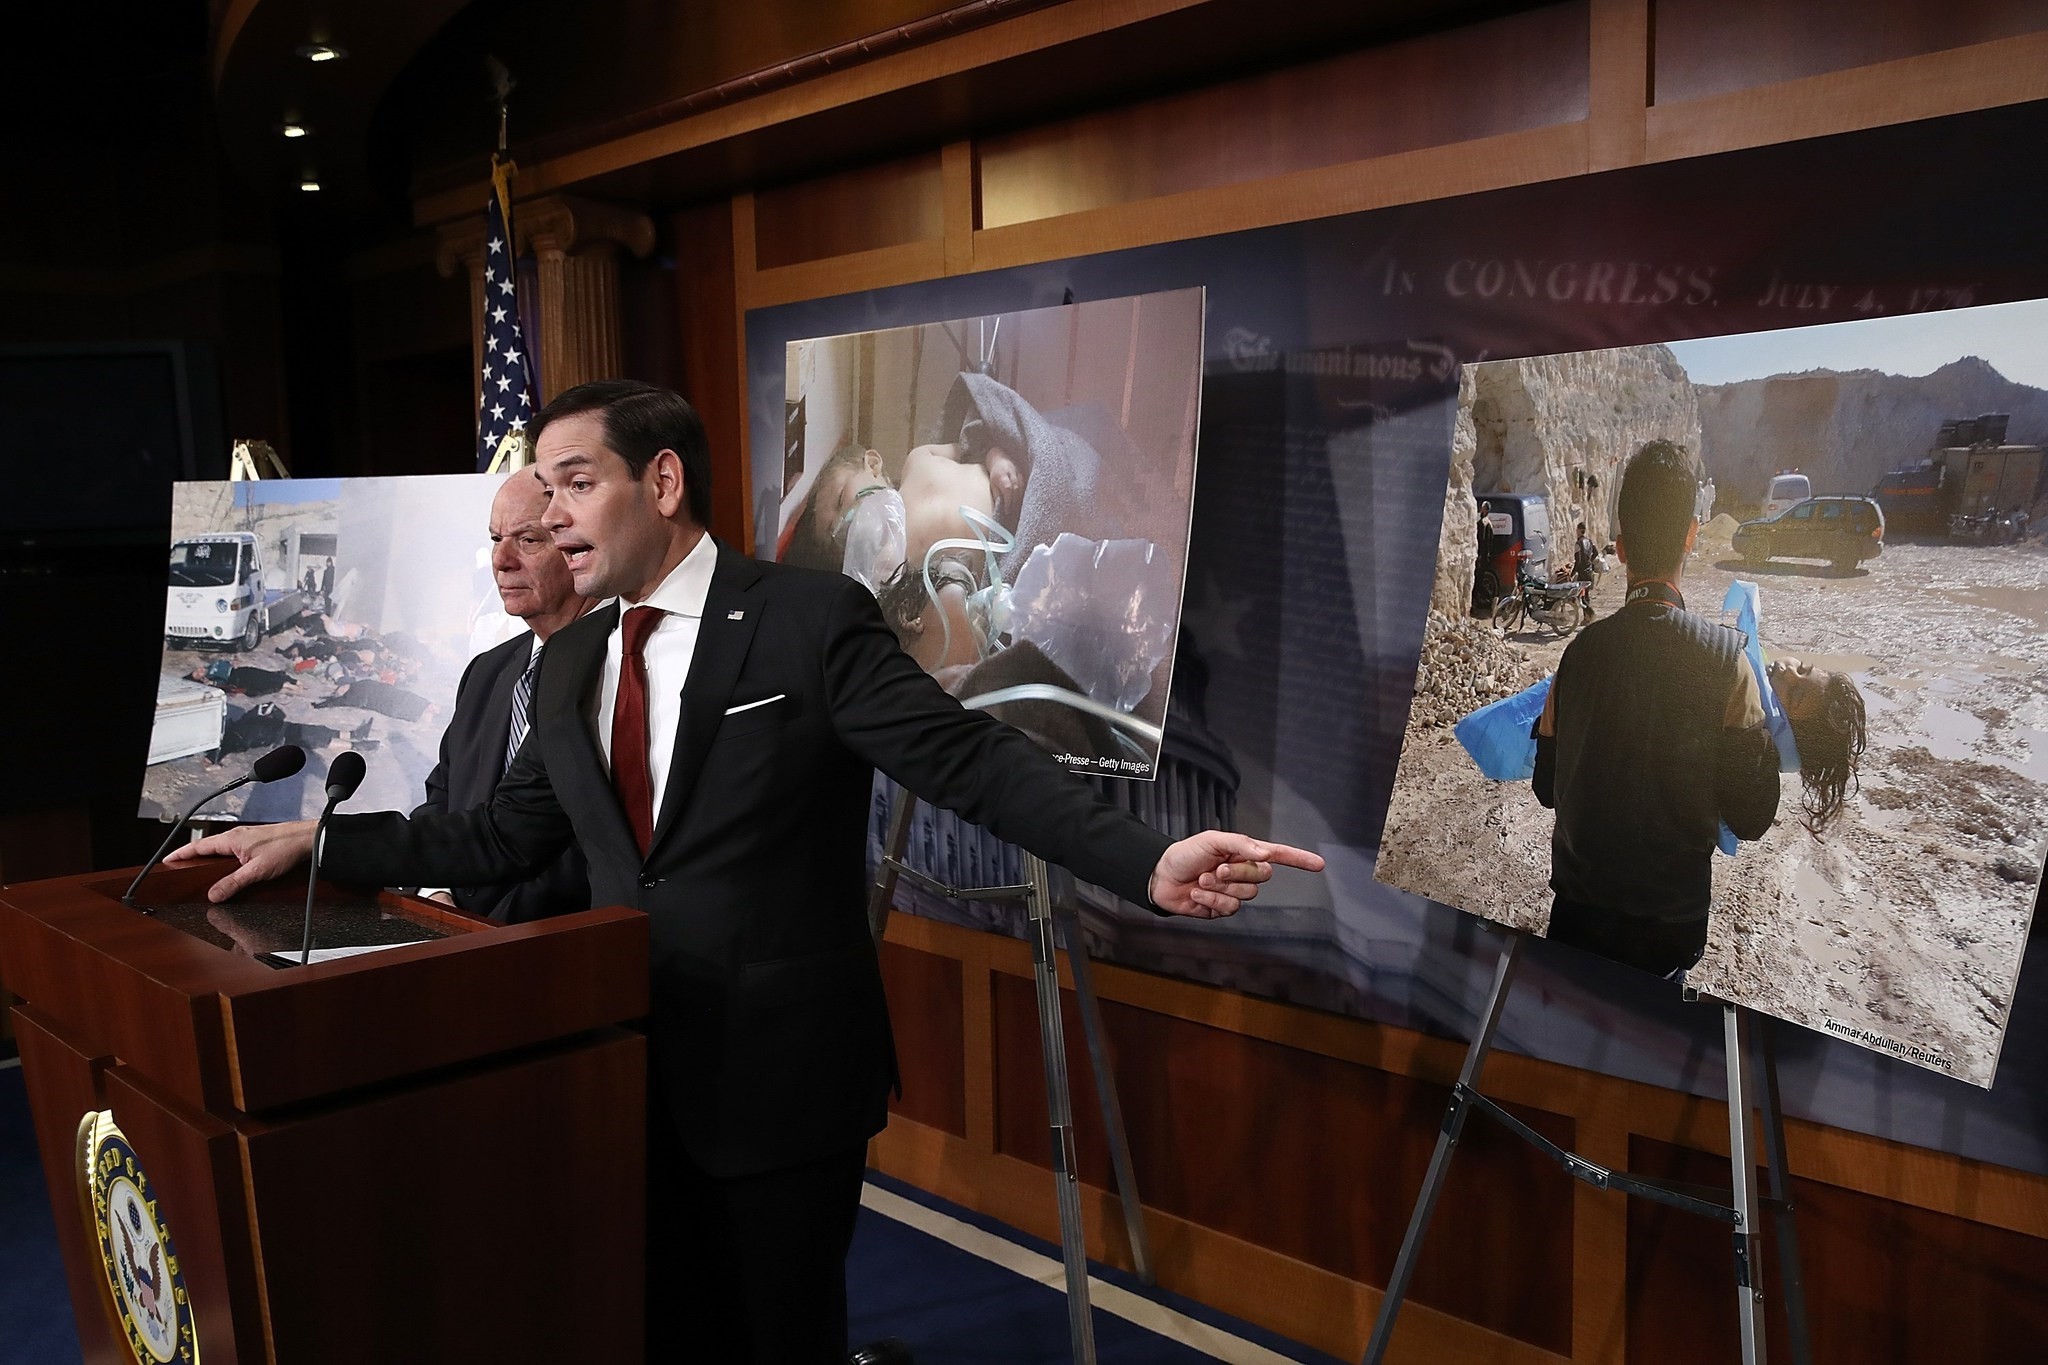  Surrounded by photographs of victims of yesterday's chemical weapon attack, Sen. Marco Rubio (R) speaks during a press conference at the U.S. Capitol. (AFP Photo)